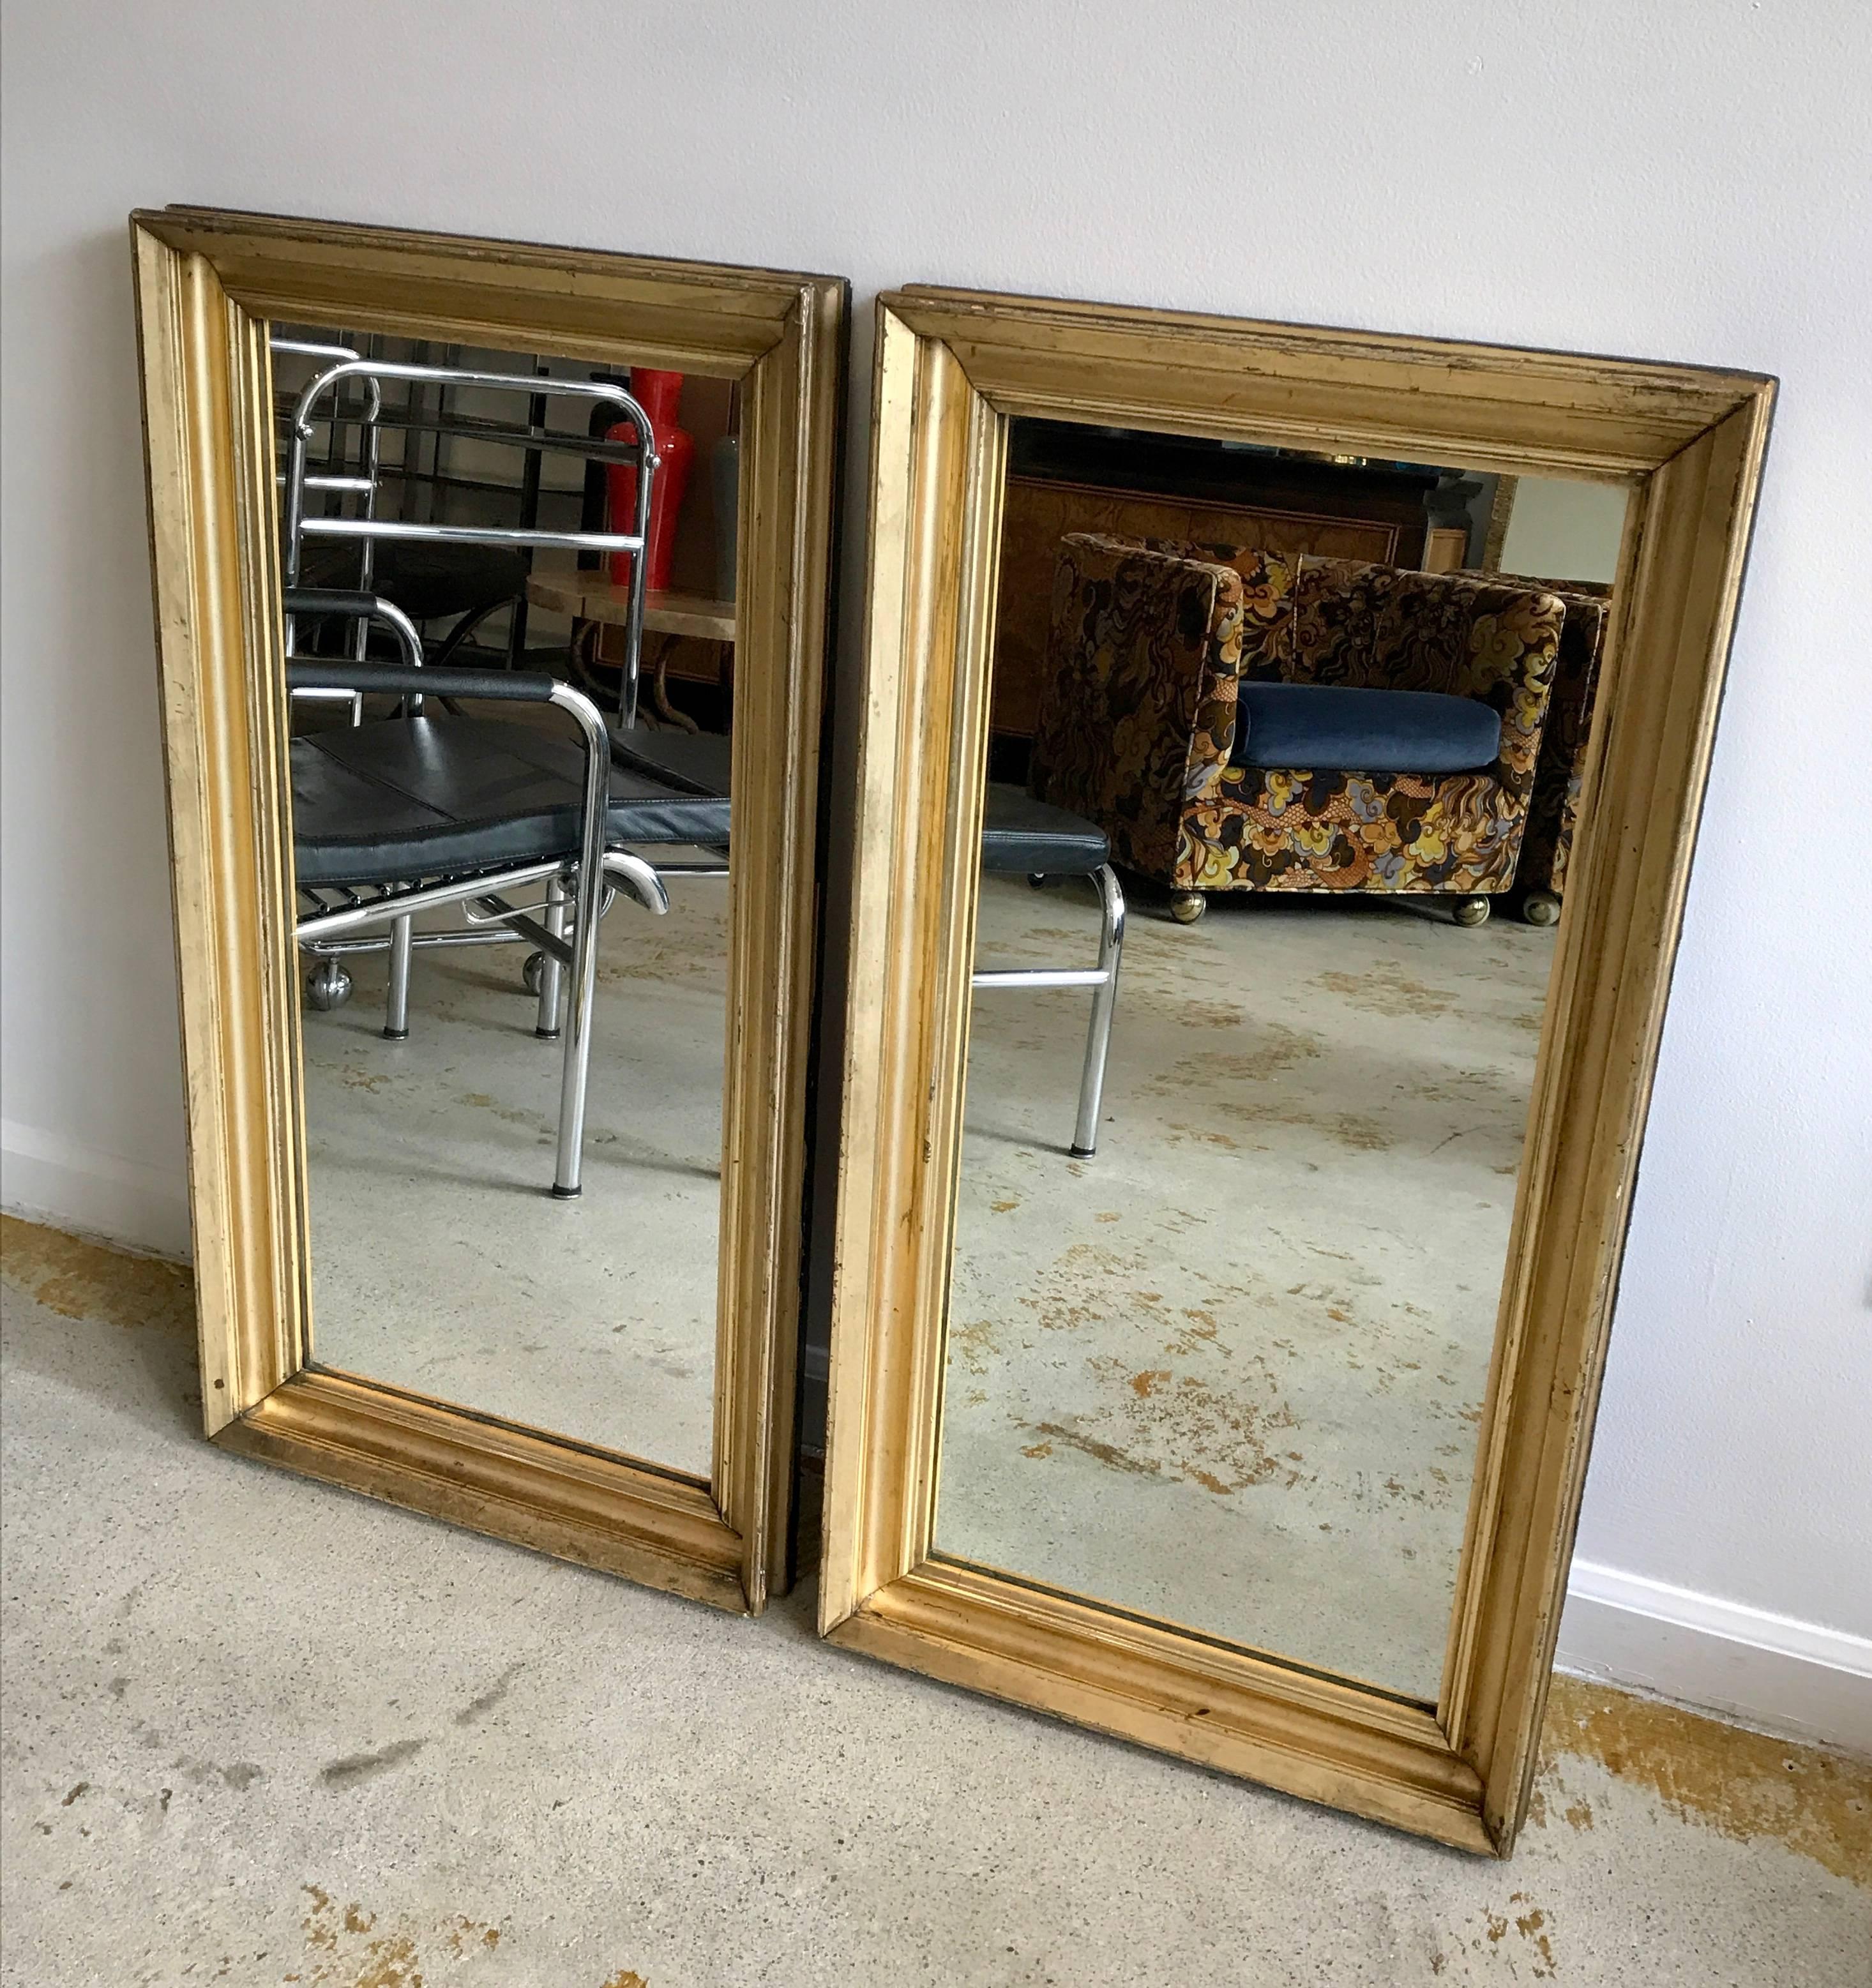 Very chic pair of gold gilt mirrors with original finish and aged patina. Classic clean lines.